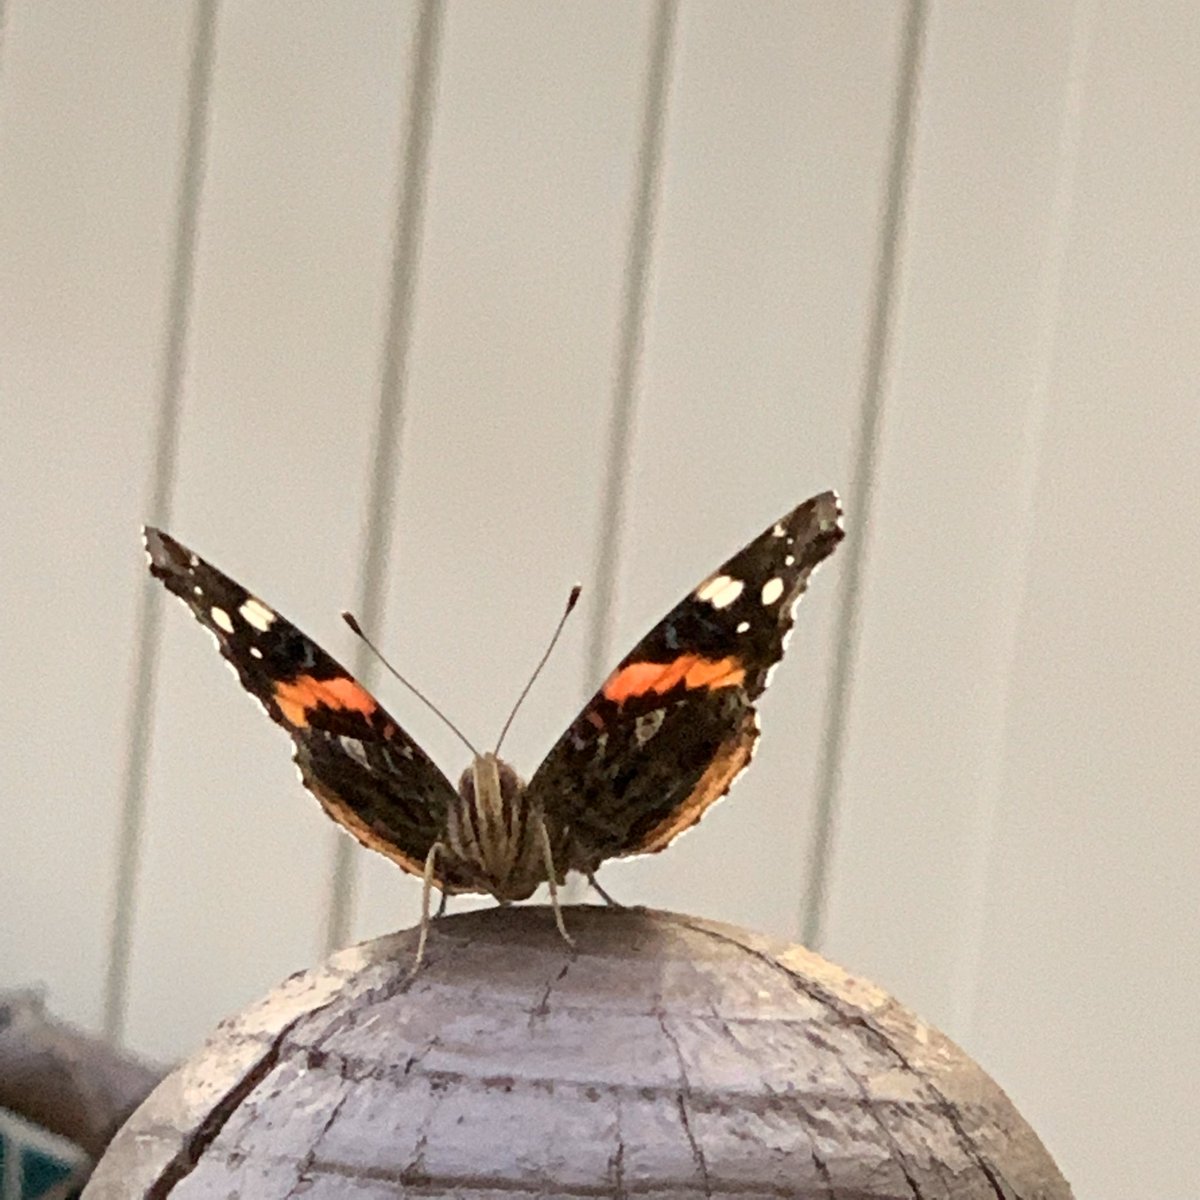 this is the black-swallowtail butterfly we had in the yard last year so i’ll keep this thread updated on its stages (p.s they like parsley)